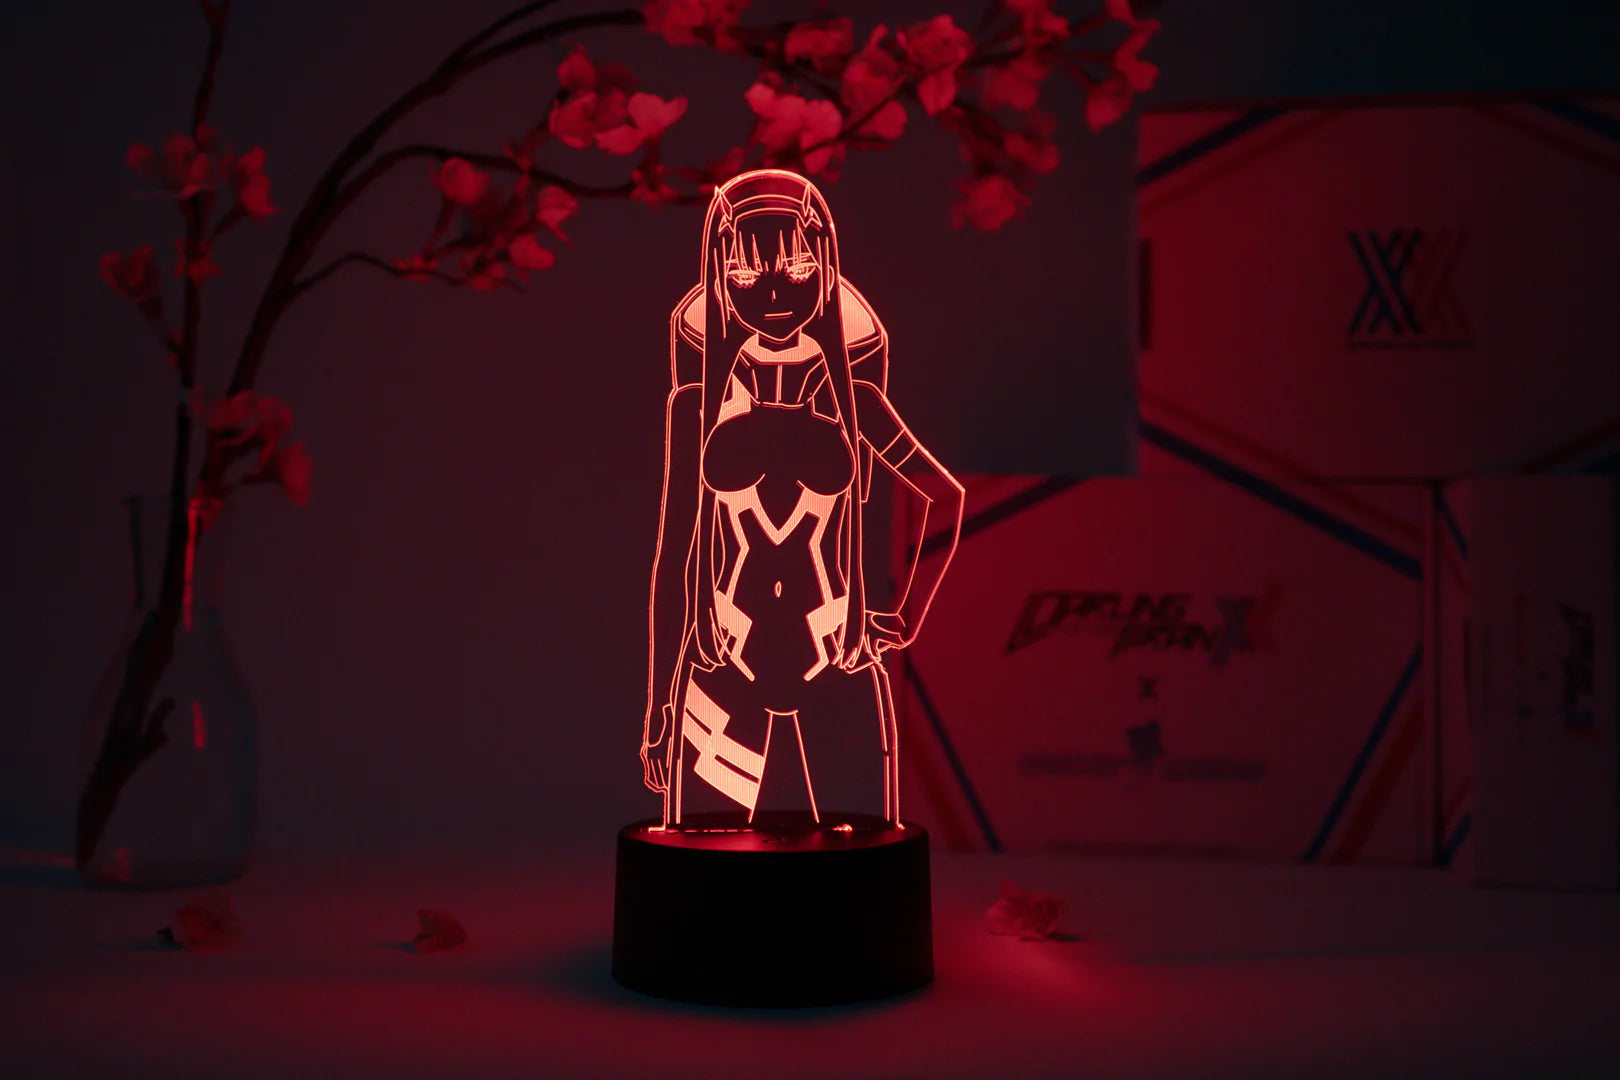 Darling in the Franxx - Zero Two Suit Otaku Lamp image count 0